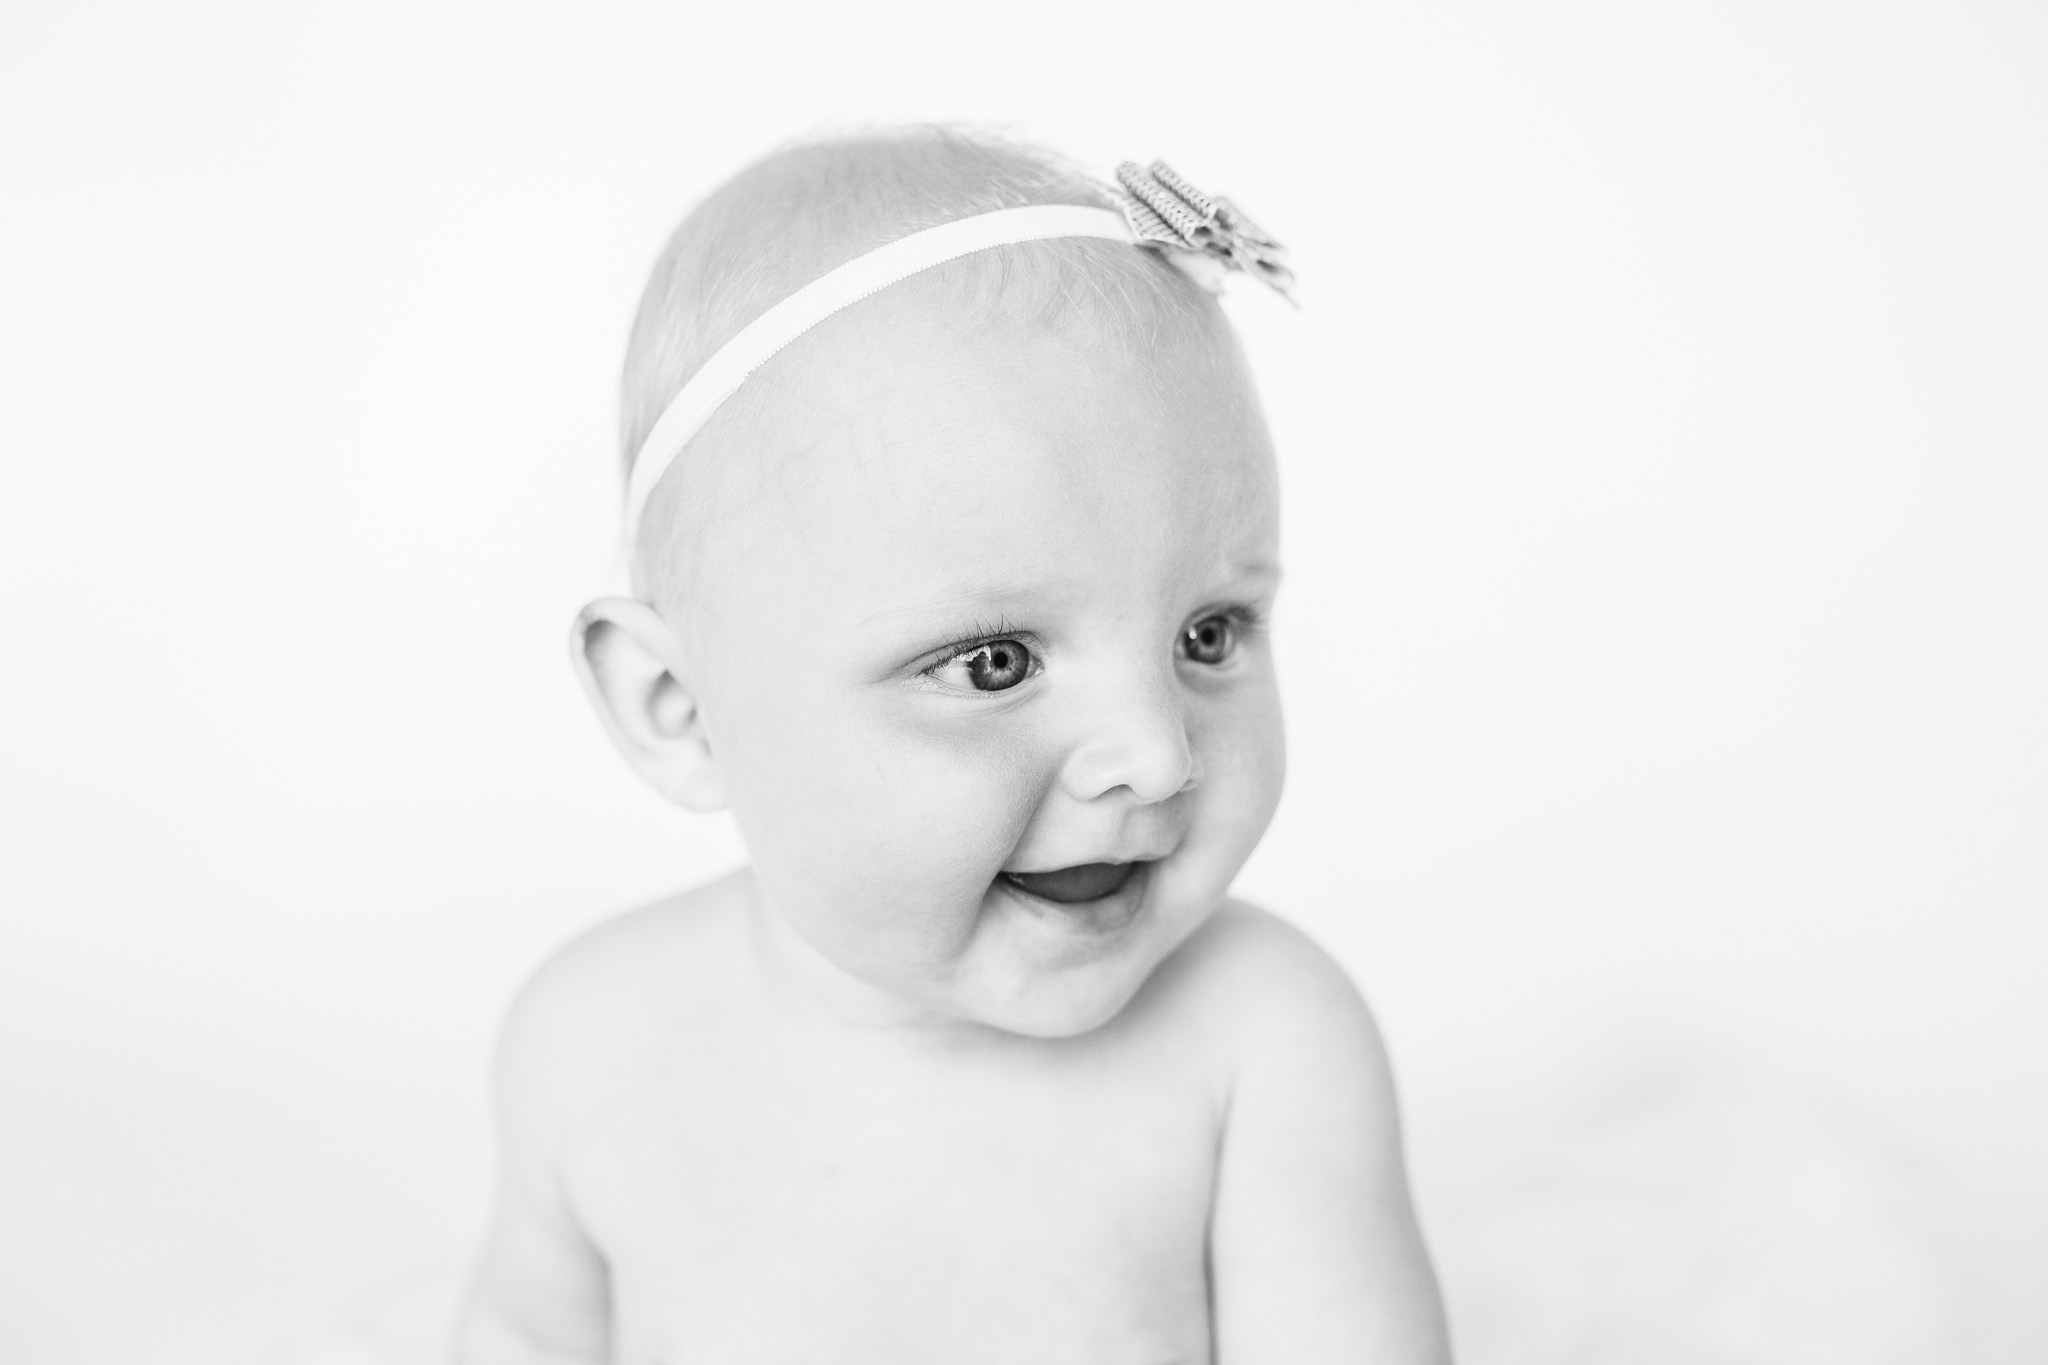 Black and white close up of child with headband - cake smash aberdeen - debbie dee photography